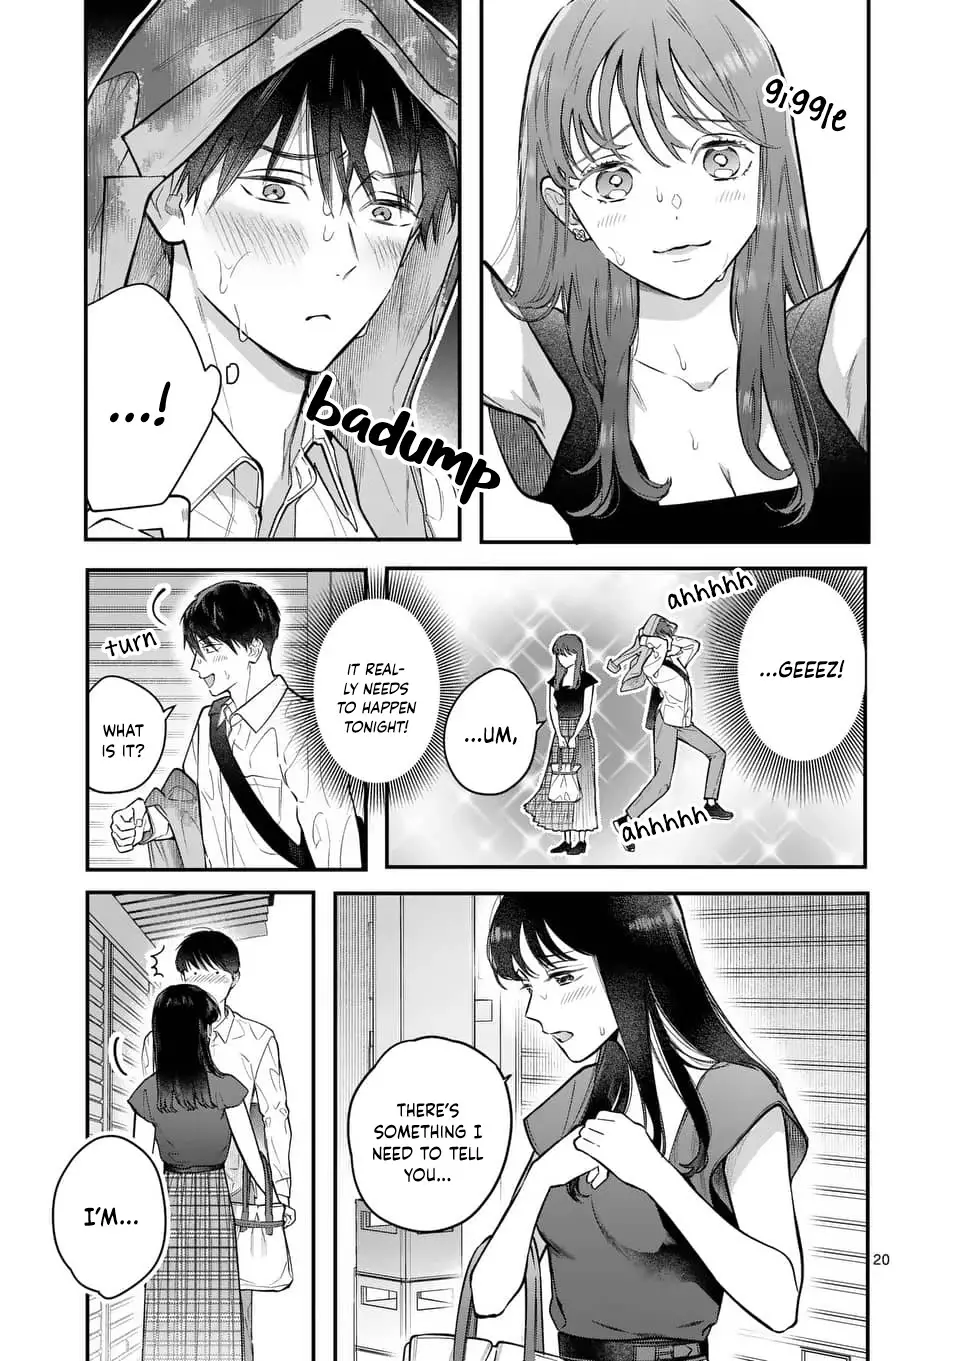 Is It Wrong To Get Done By A Girl? - 3 page 20